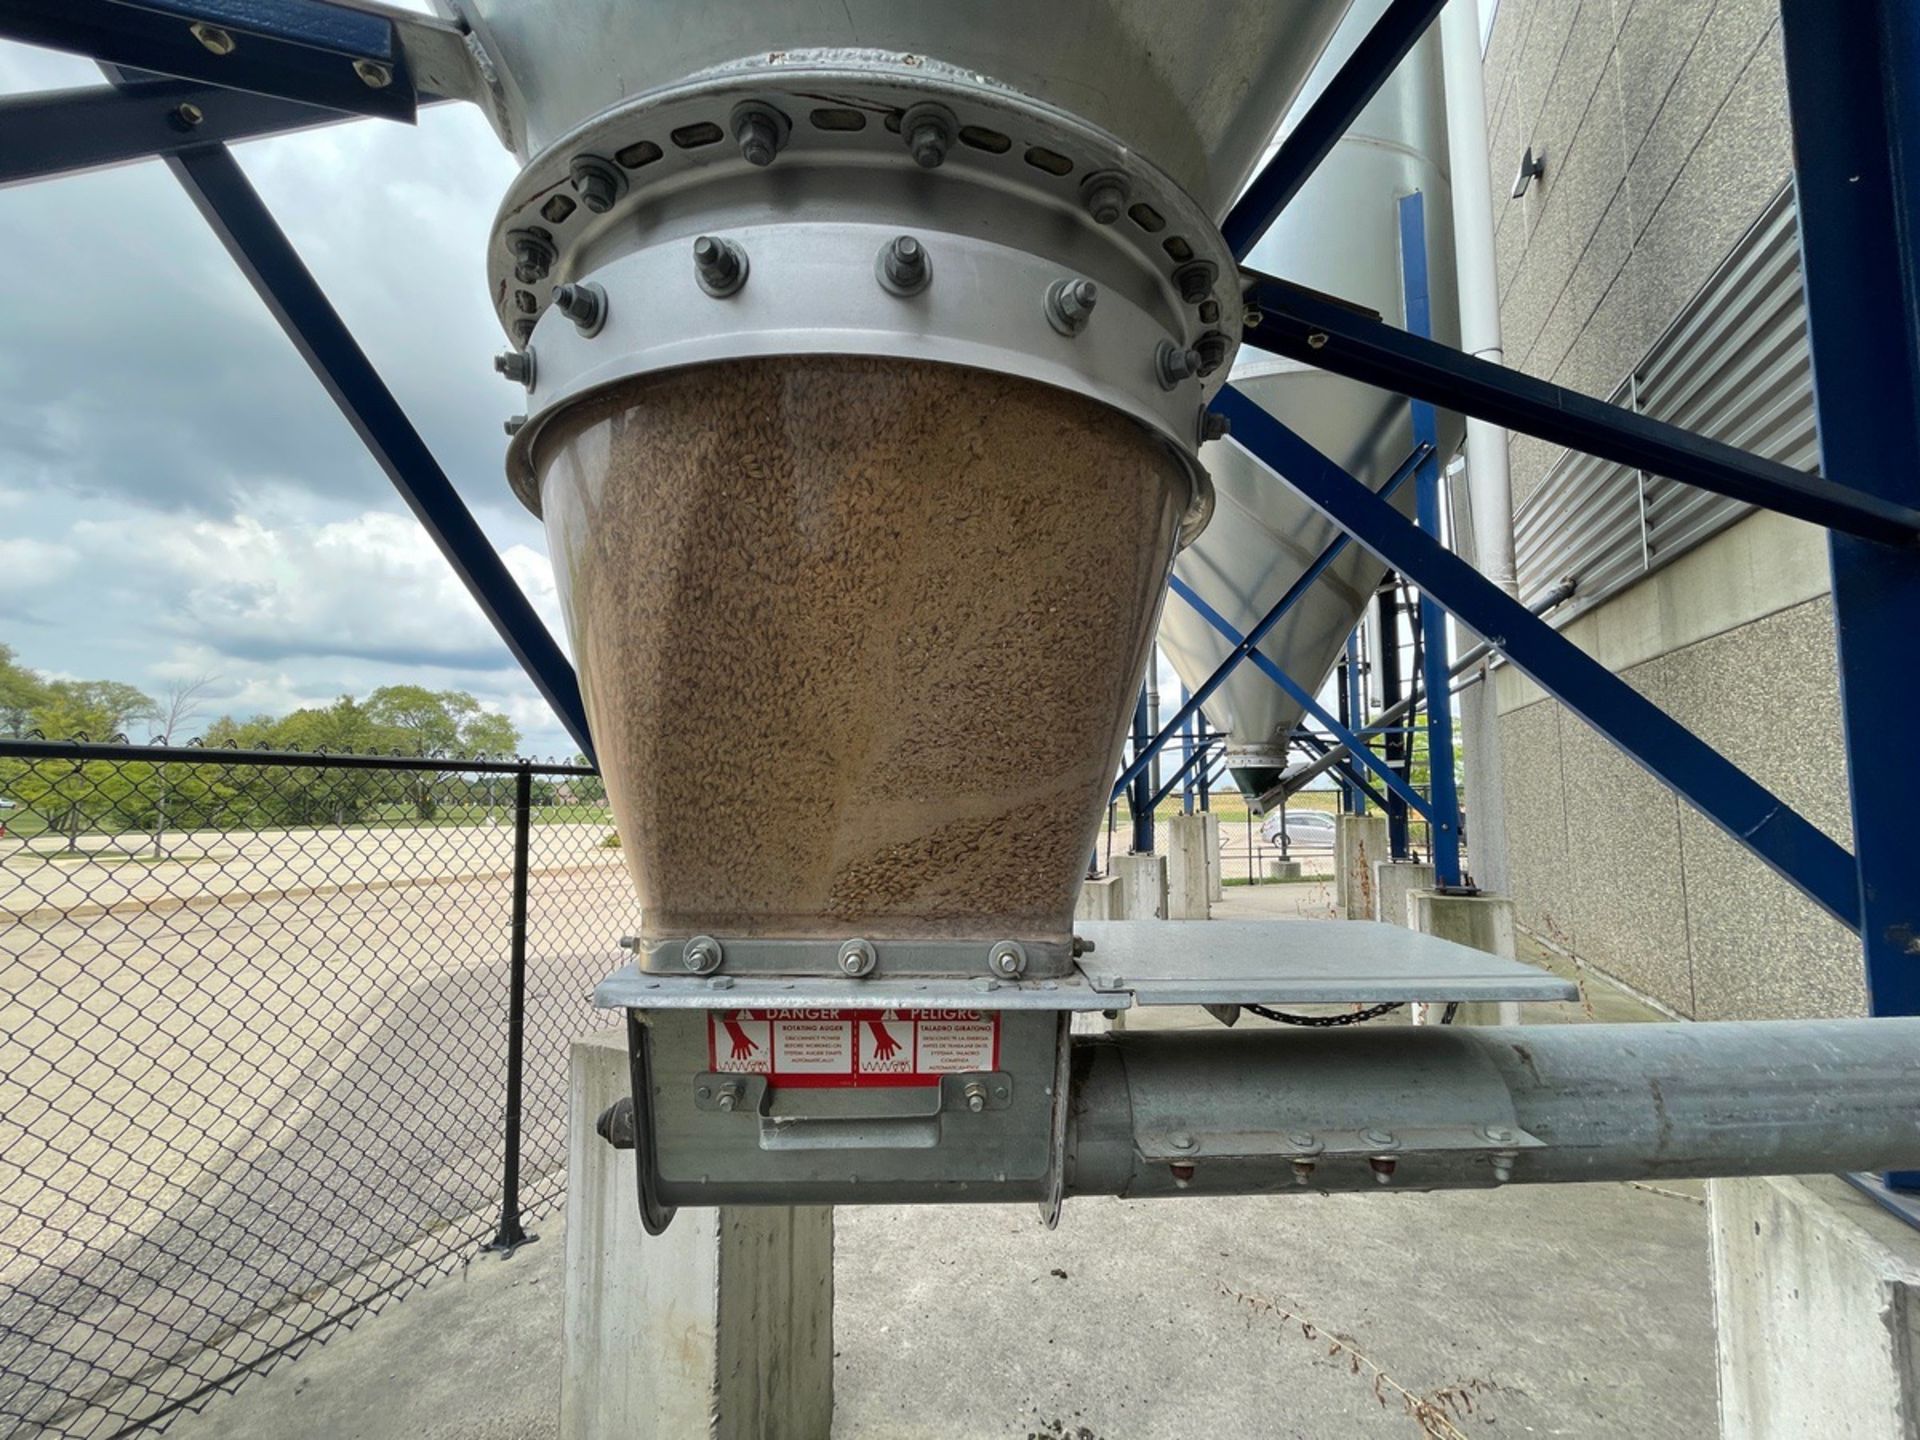 2013 Schuld/Bushnell 34.6 Ton Grain Silo, HP-60, 1730 Cubic ft, 10' x 18' Tank, S/N | Rig Fee $3500 - Image 9 of 12